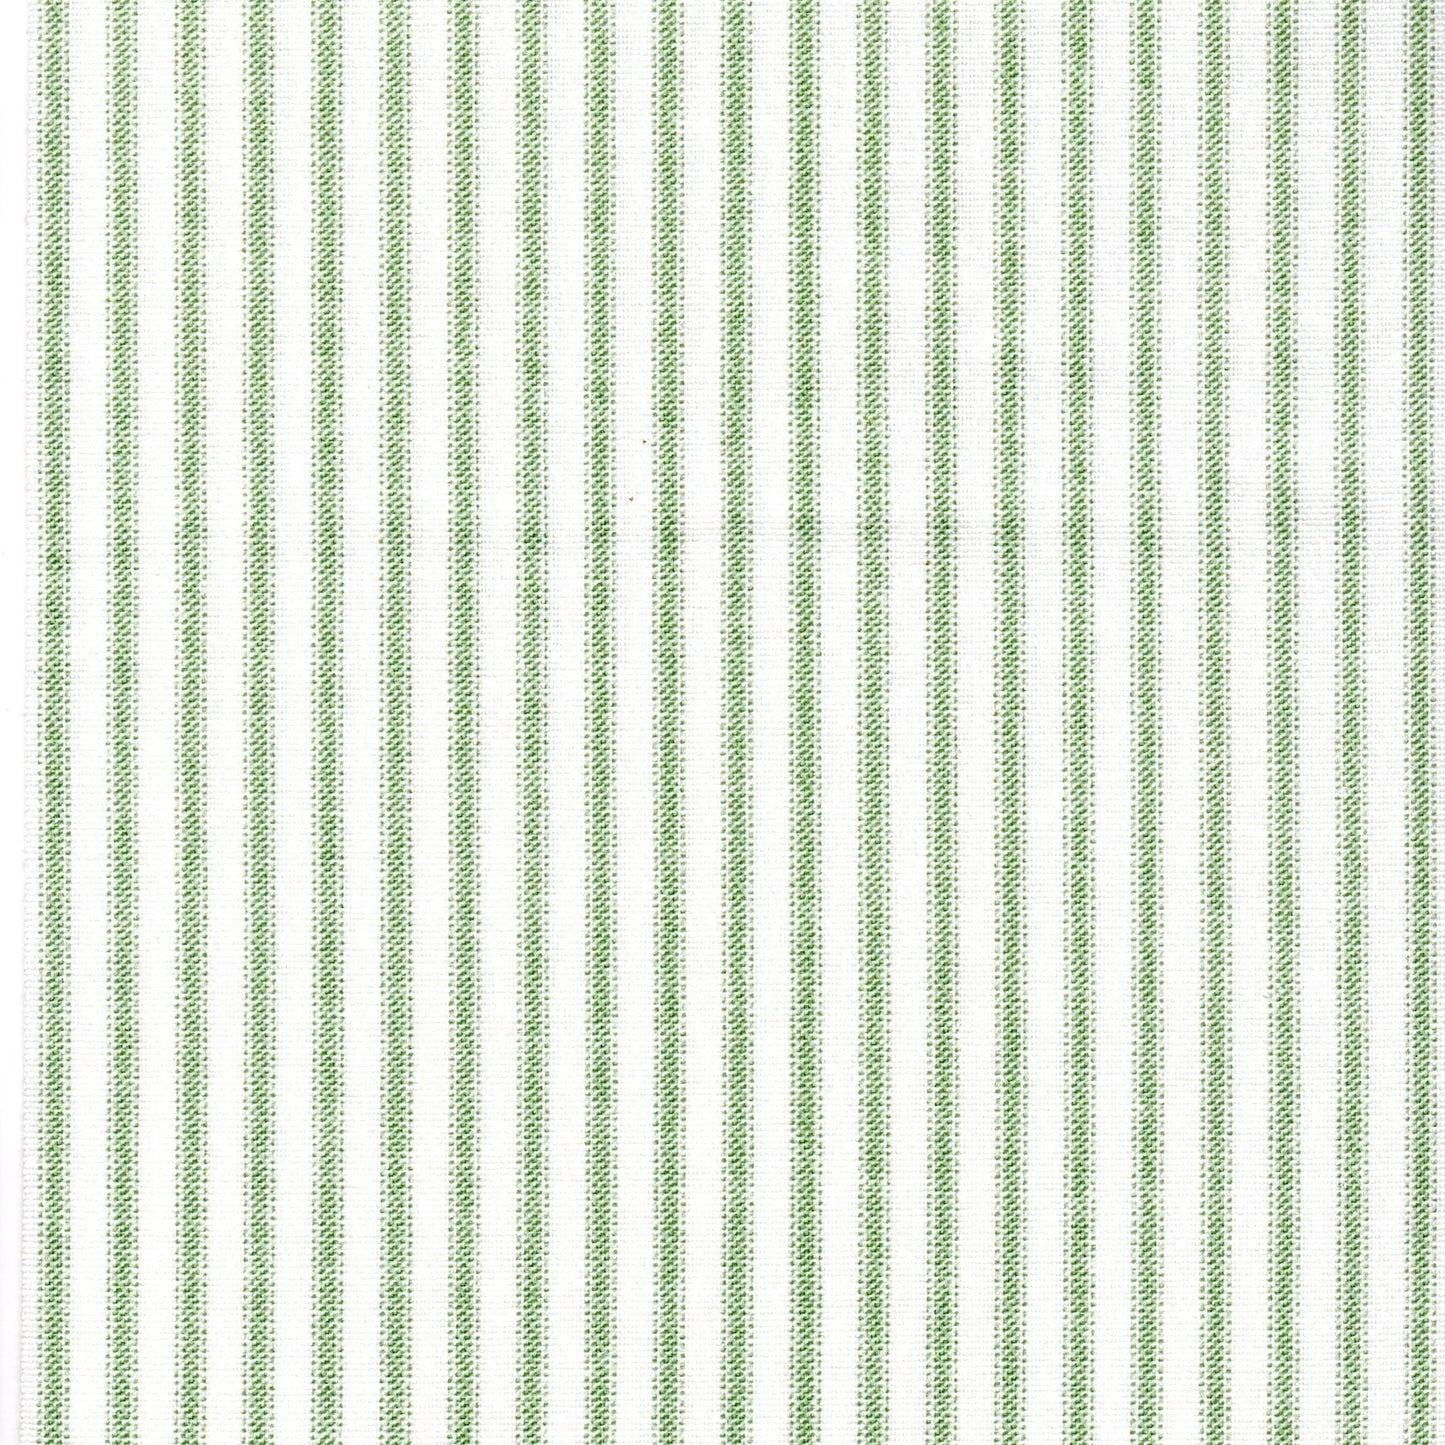 shower curtain in Classic Sage Green Ticking Stripe on White